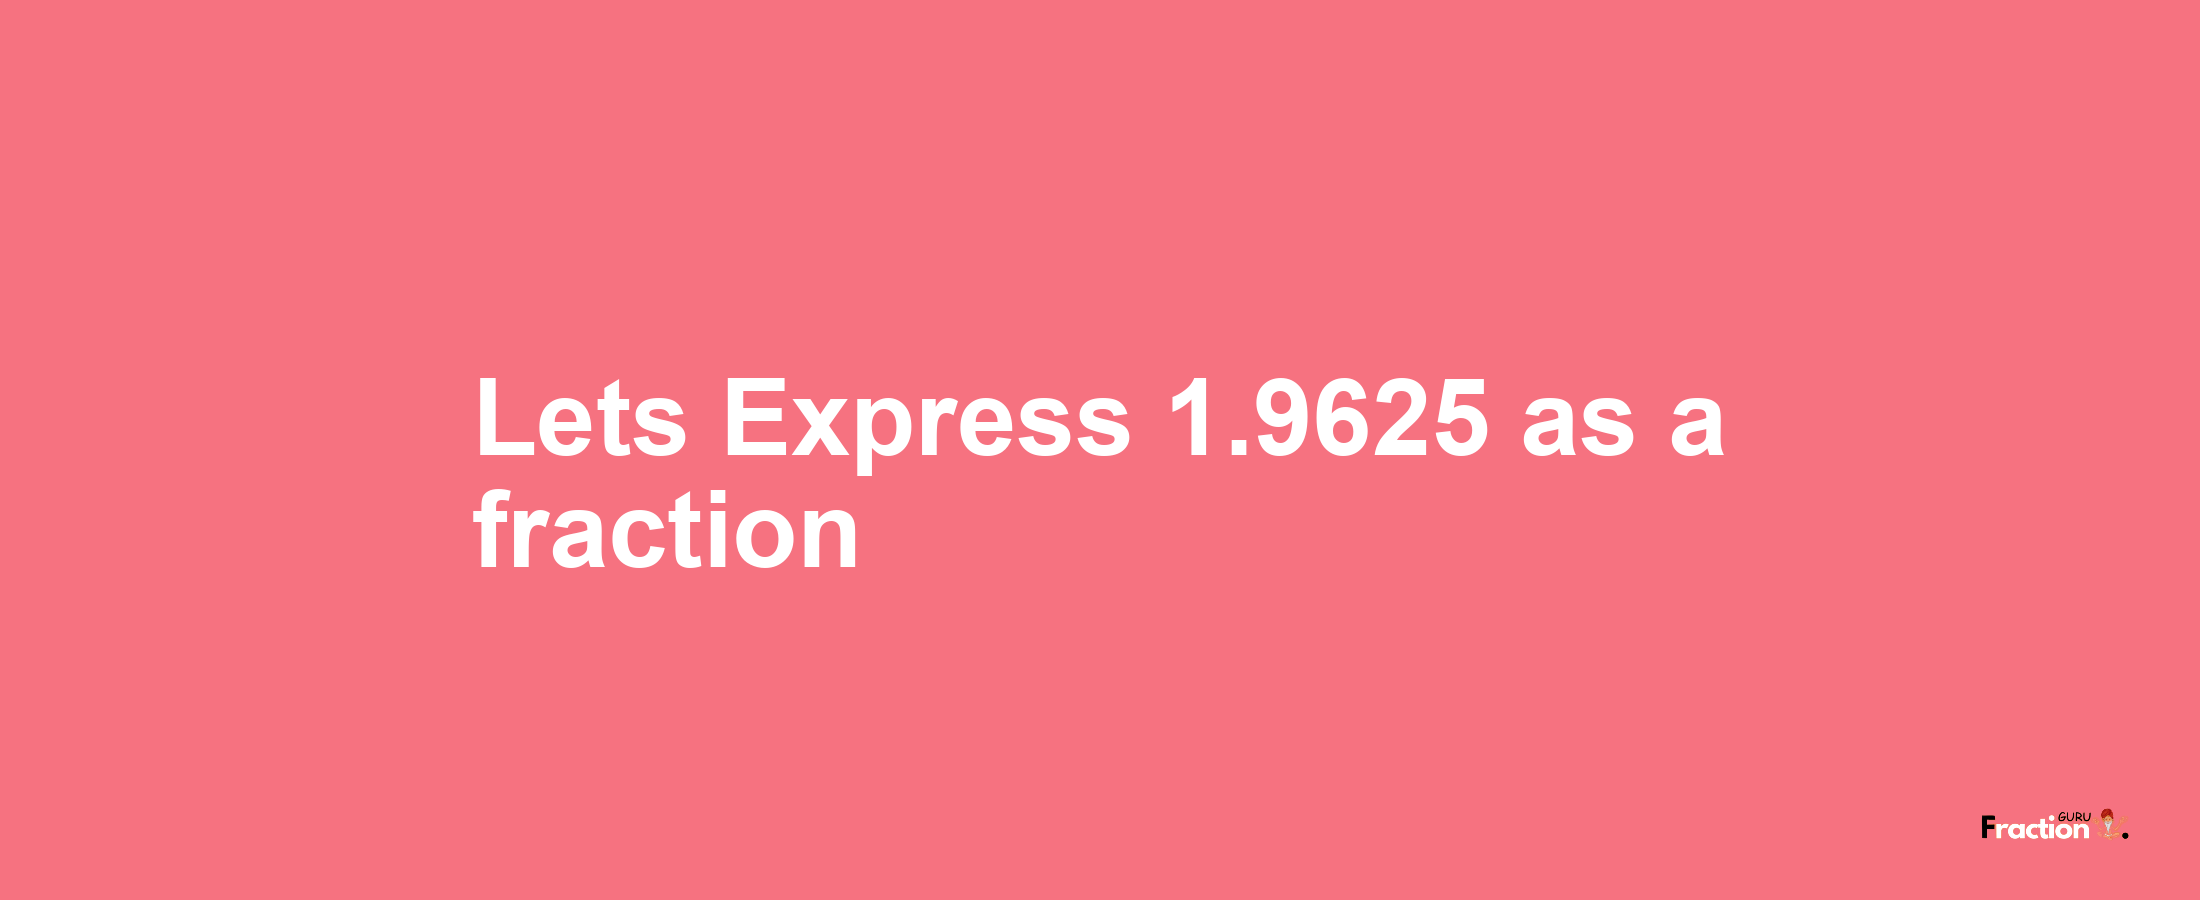 Lets Express 1.9625 as afraction